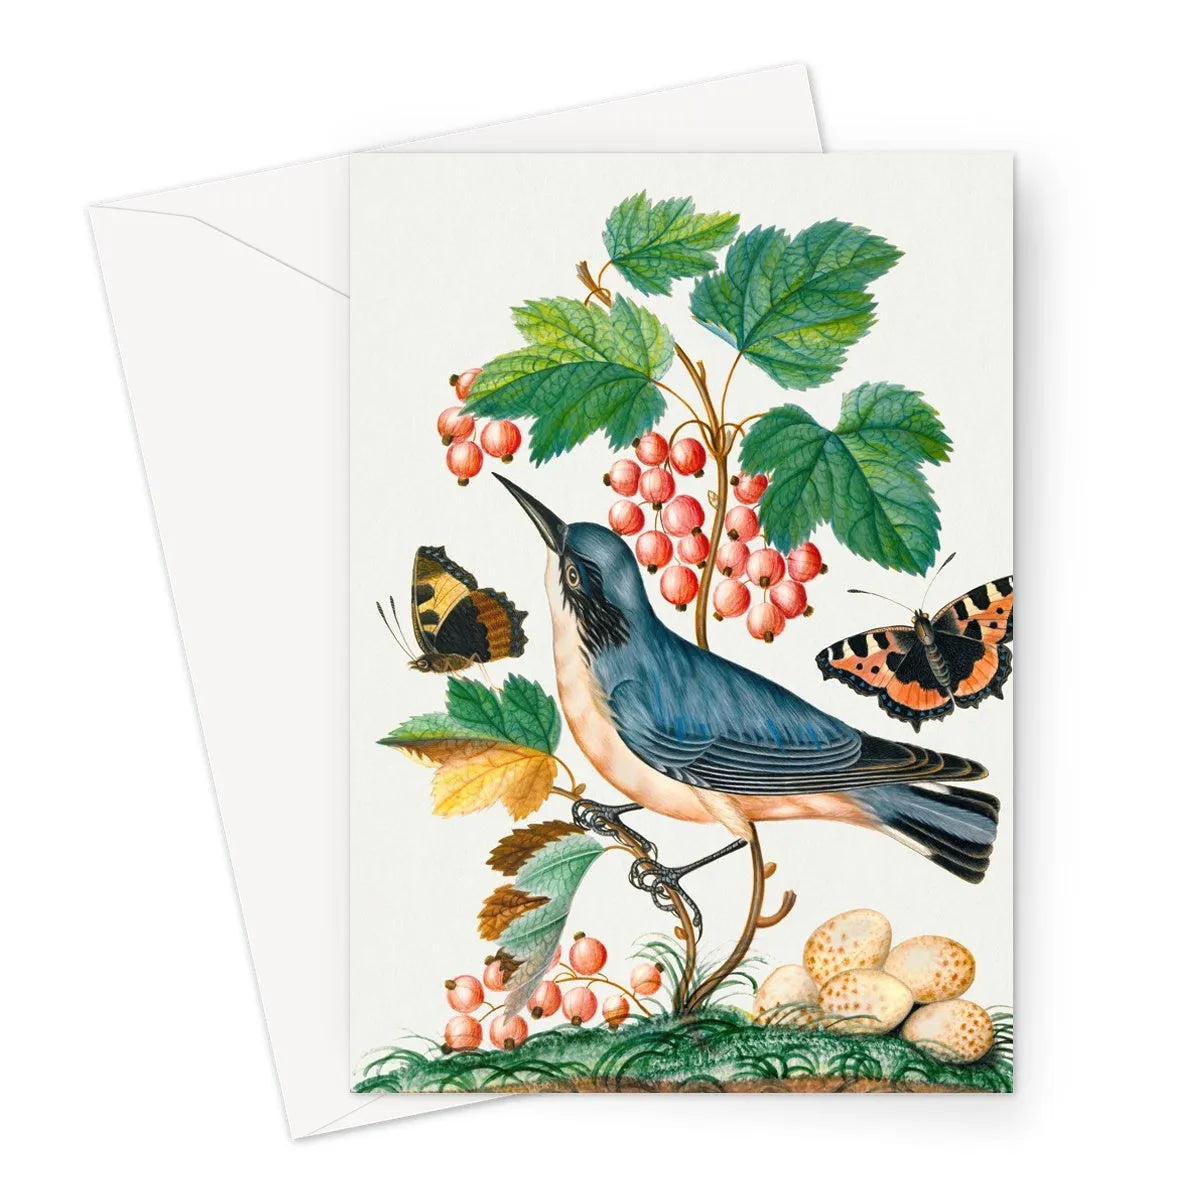 Subalpine Warbler Strawberry Red Admiral Wasp Cocoon And Ants By James Bolton Greeting Card - A5 Portrait / 1 Card